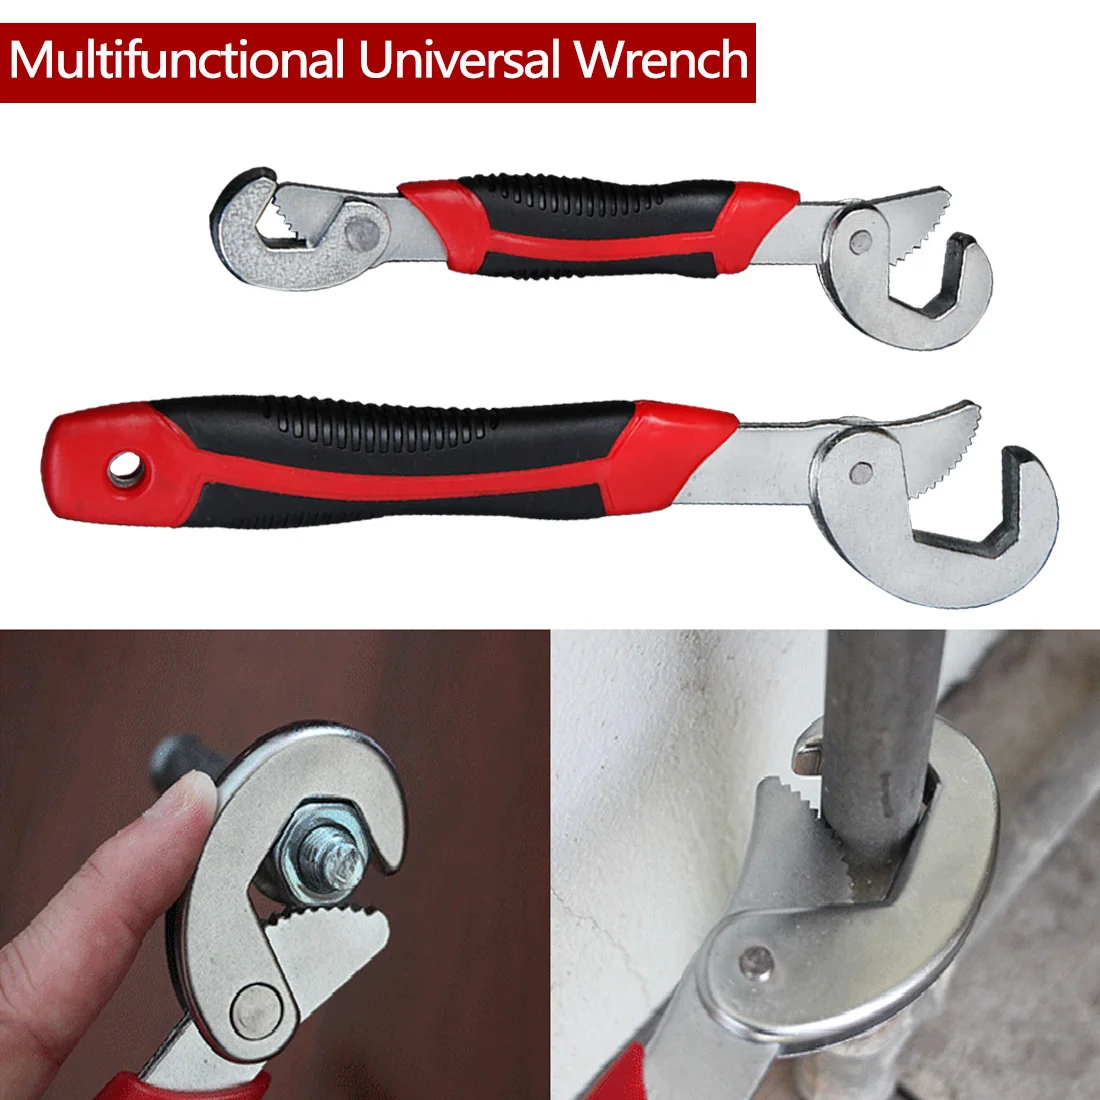 

Spanner Set 8-32mm Multi-function Wrench Universal key Quick Snap and Grip Adjustable Spanner Wrench For Nuts and Bolts